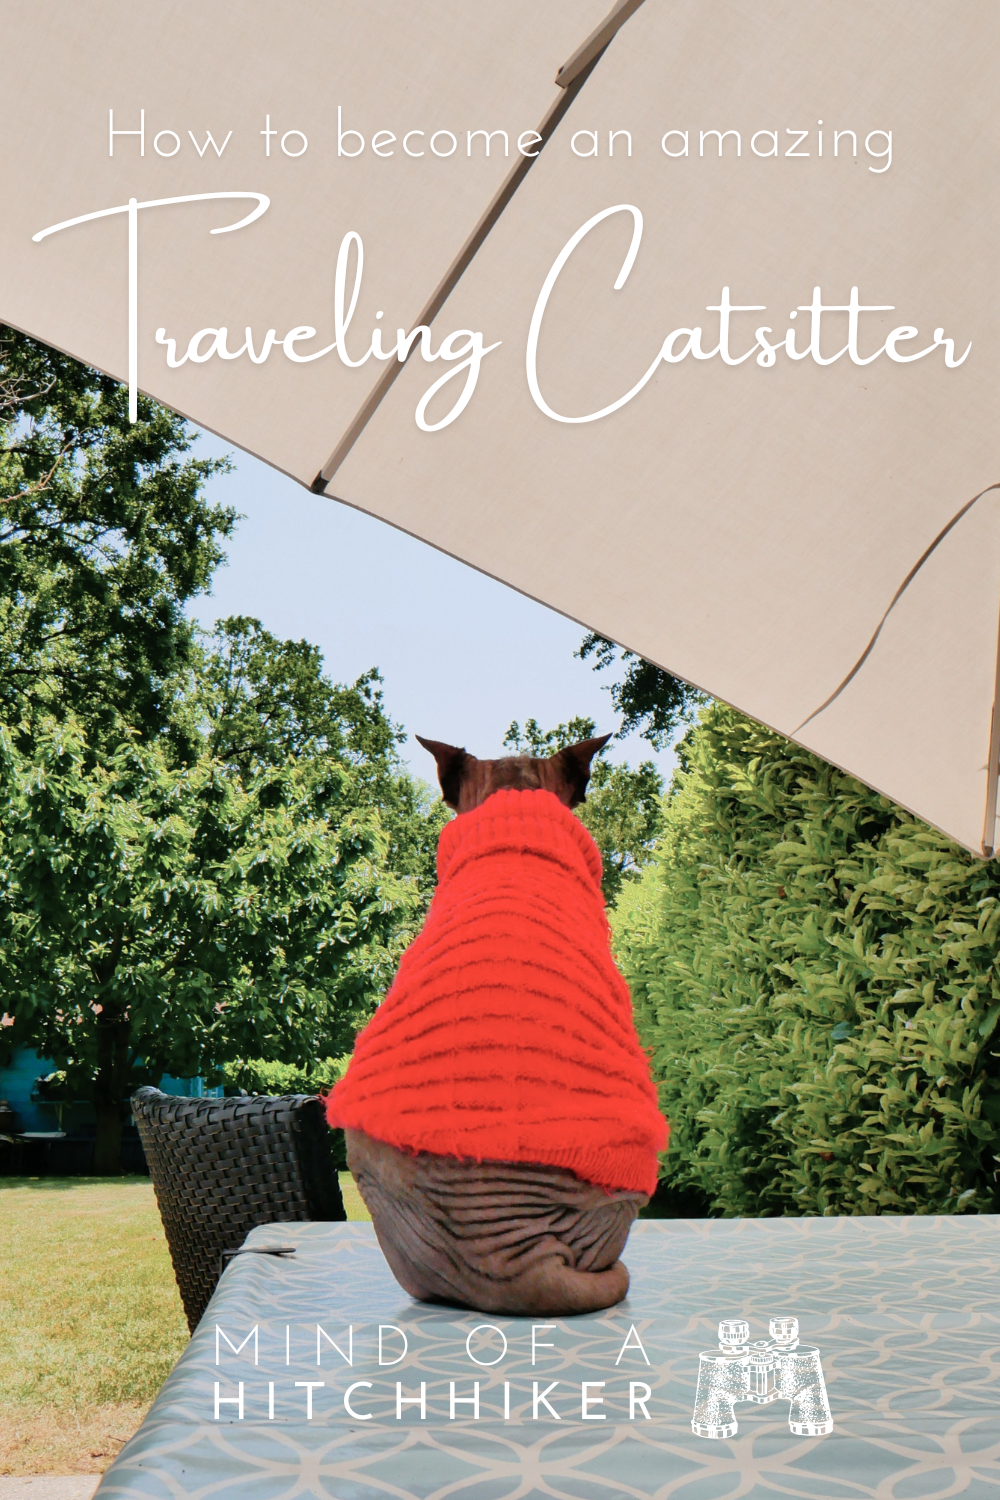 how to become amazing traveling catsitters tips for your first reviews on trustedhousesitters